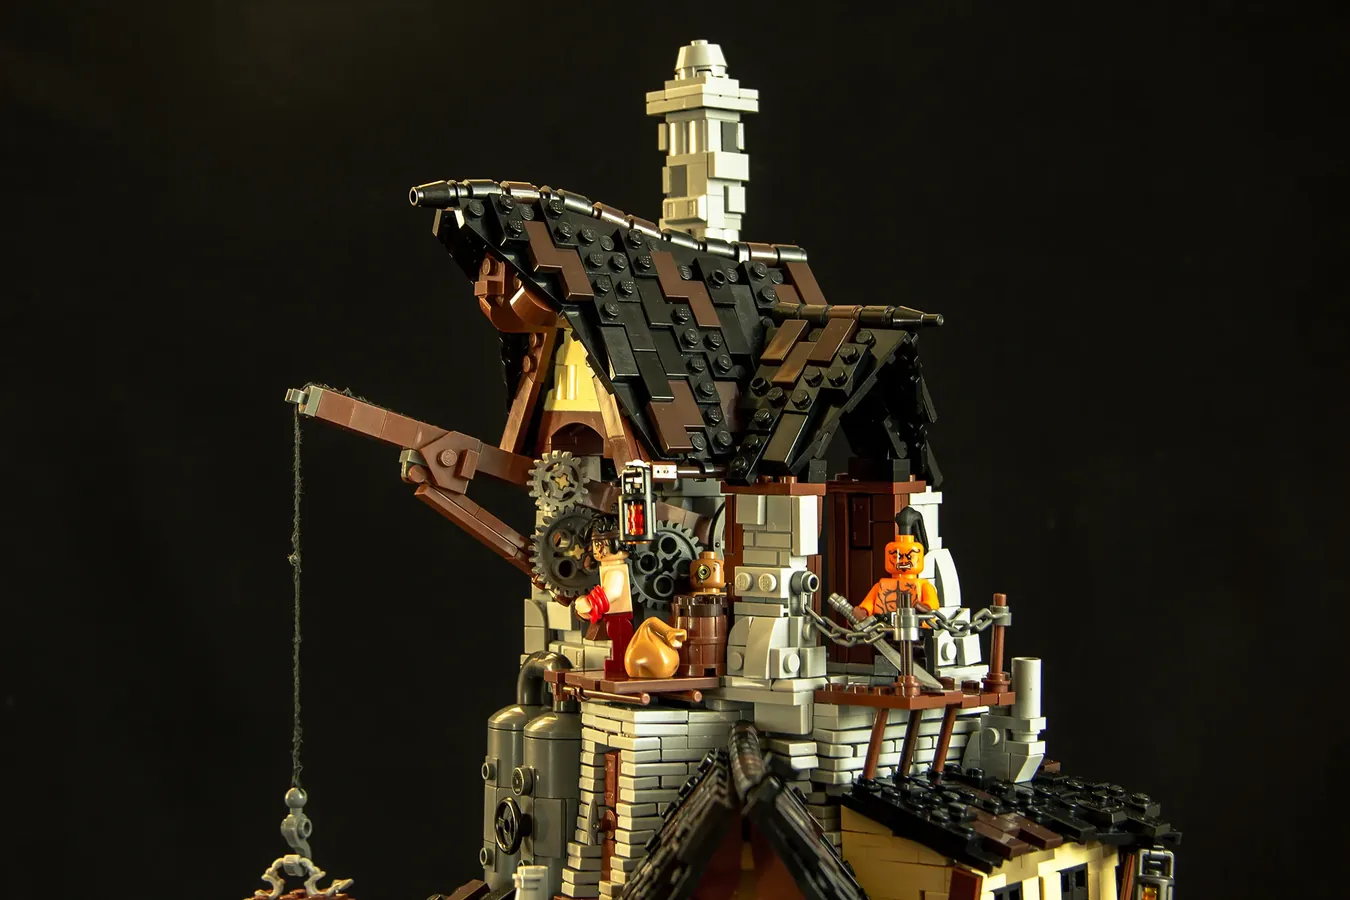 PIRATE TAVERN Achieves 10K Support on LEGO IDEAS